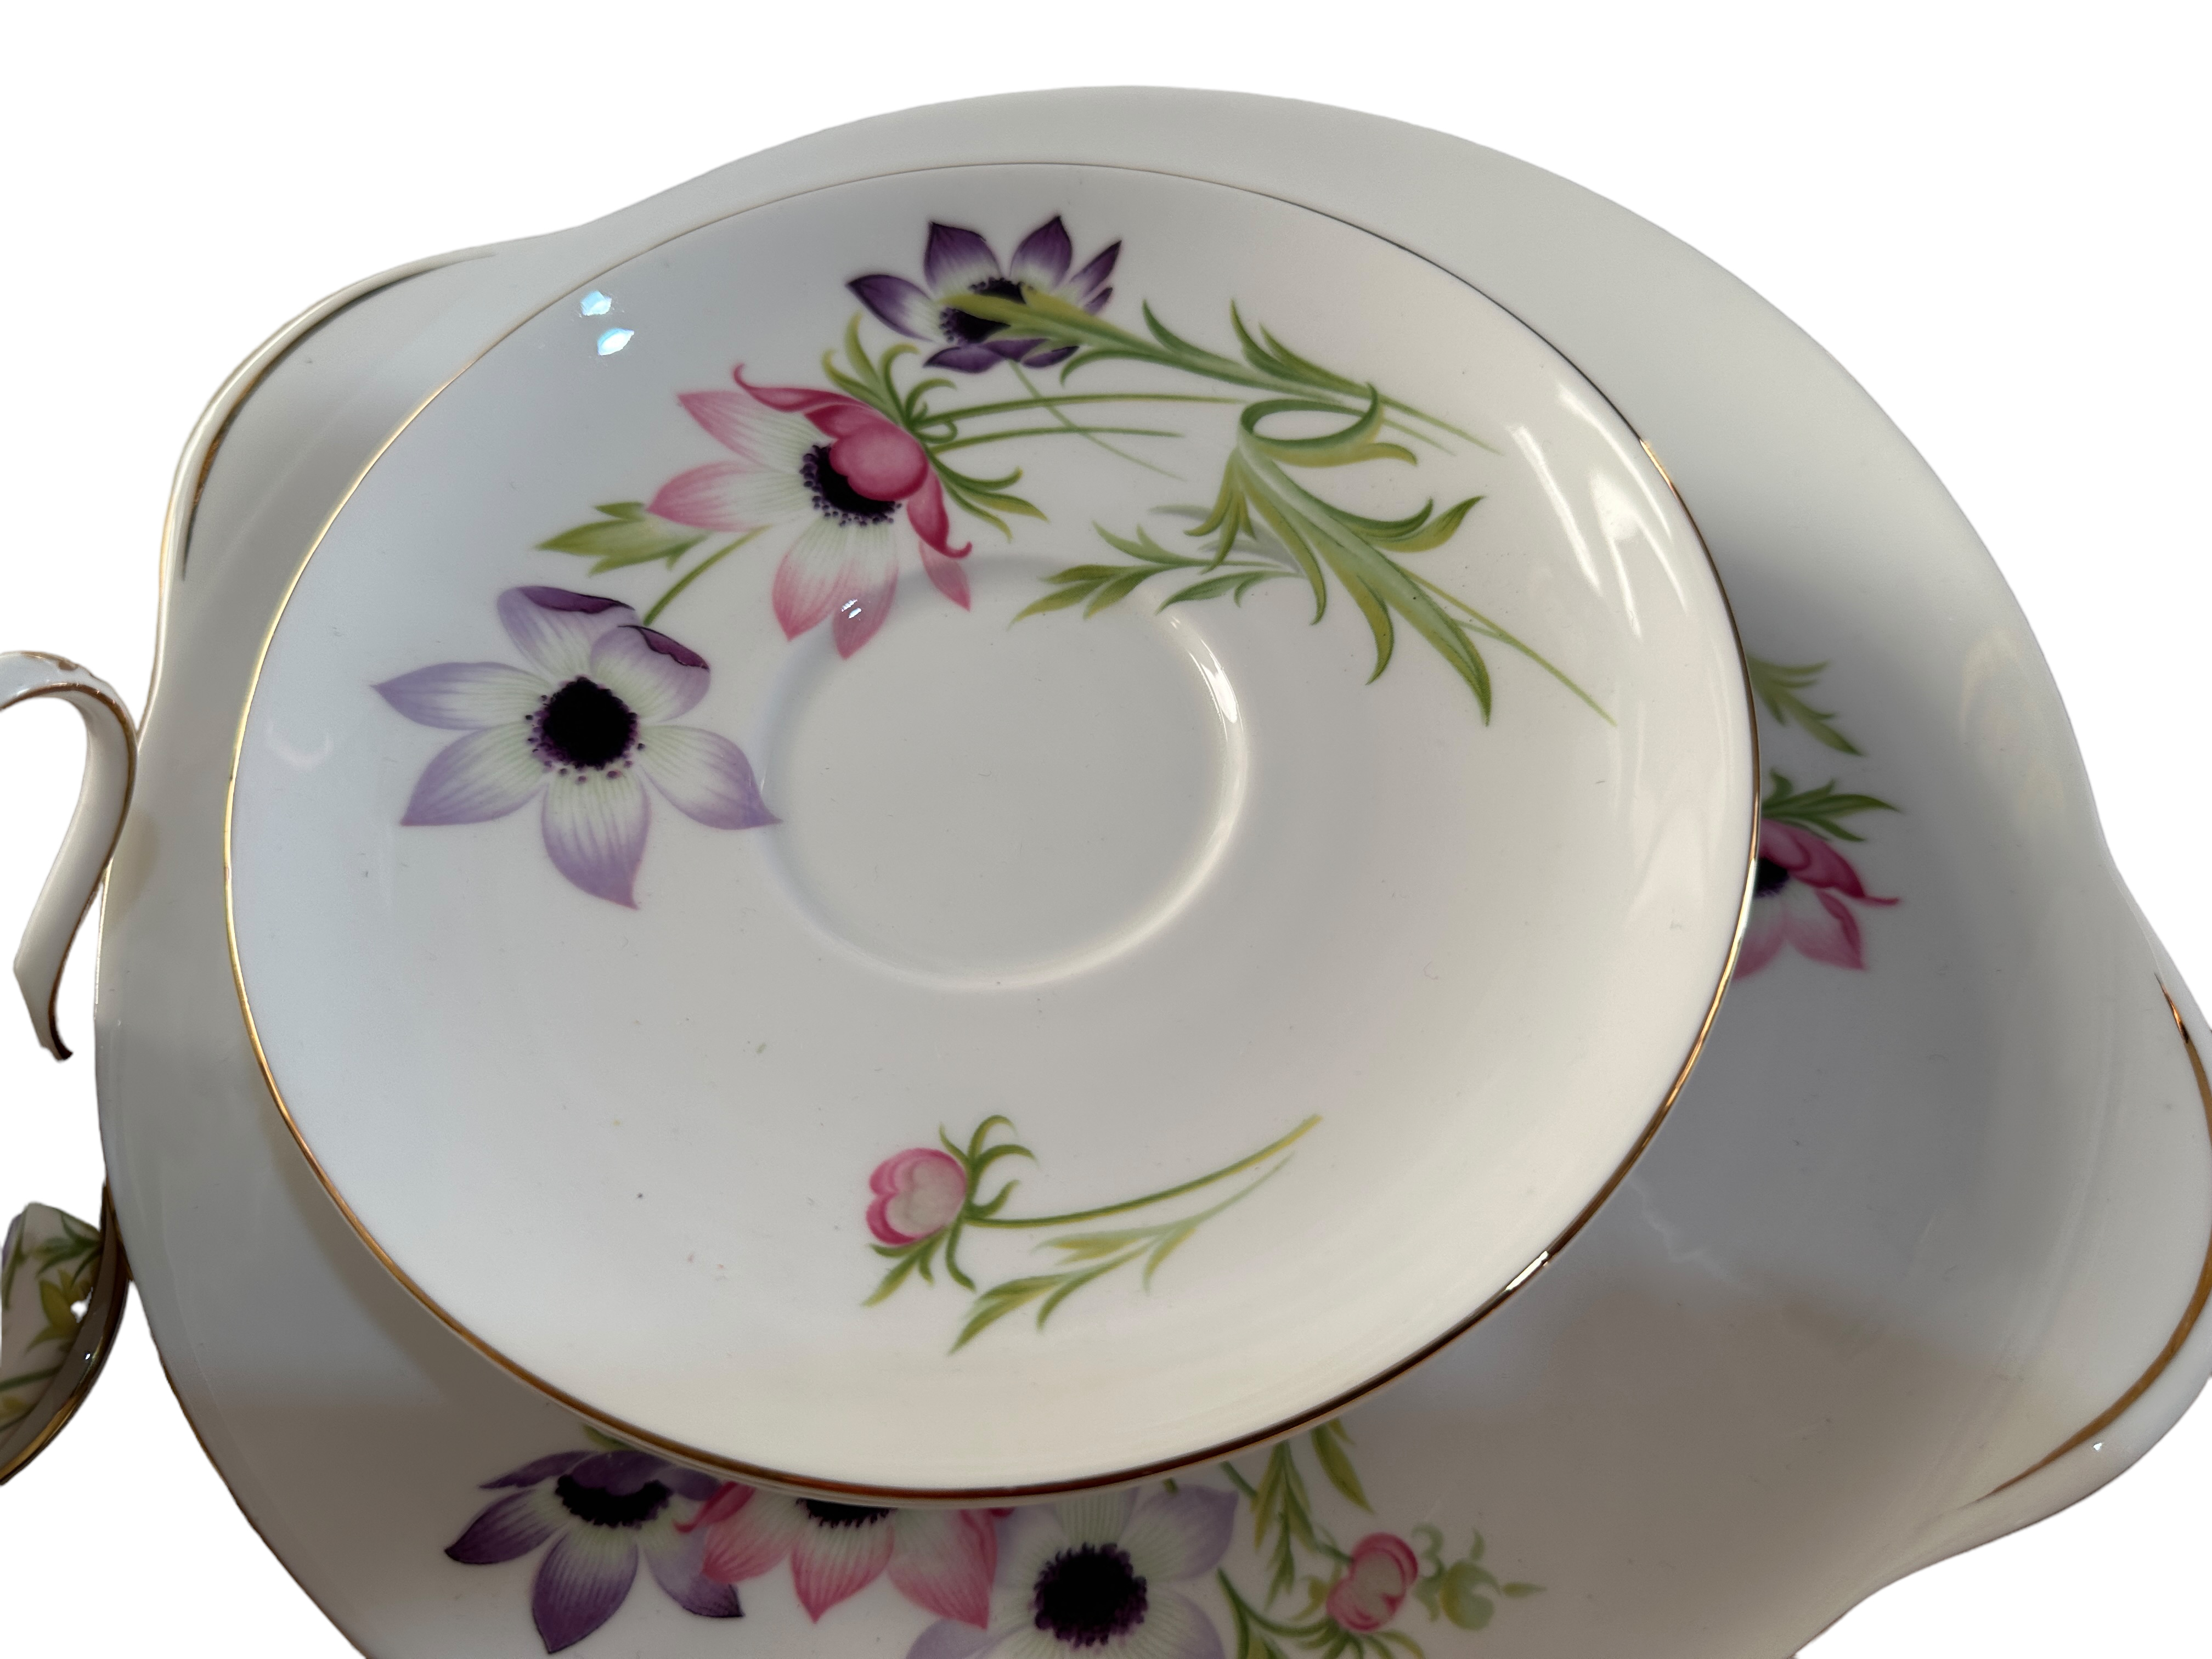 Vintage Shelley "Anemone Pattern" Teaset - 19 pieces. - Image 3 of 6